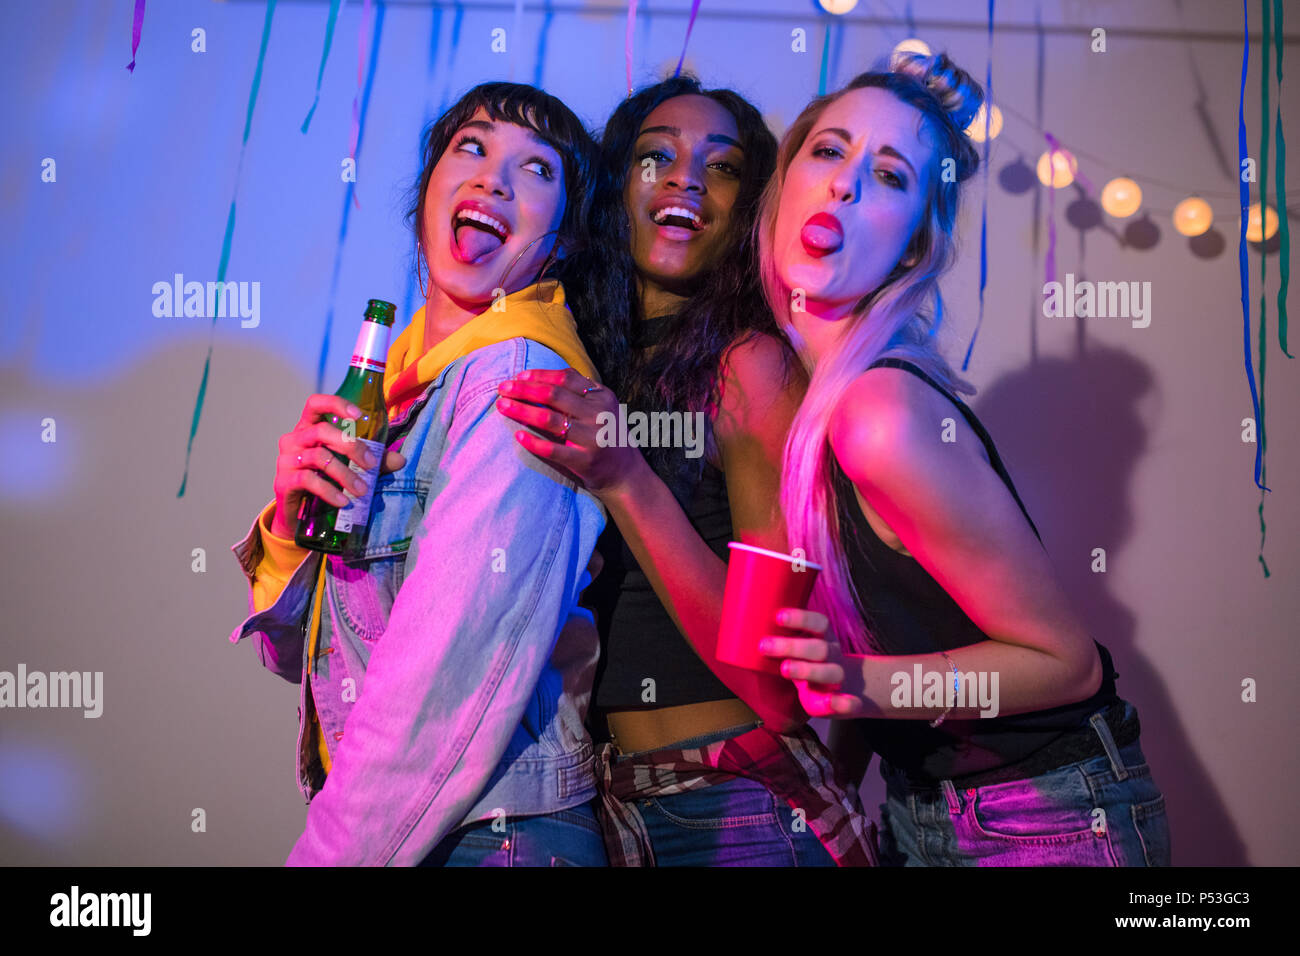 Three young women standing together making faces while holding drinks at a house party. Friends posing for a photograph sticking out their tongues and Stock Photo